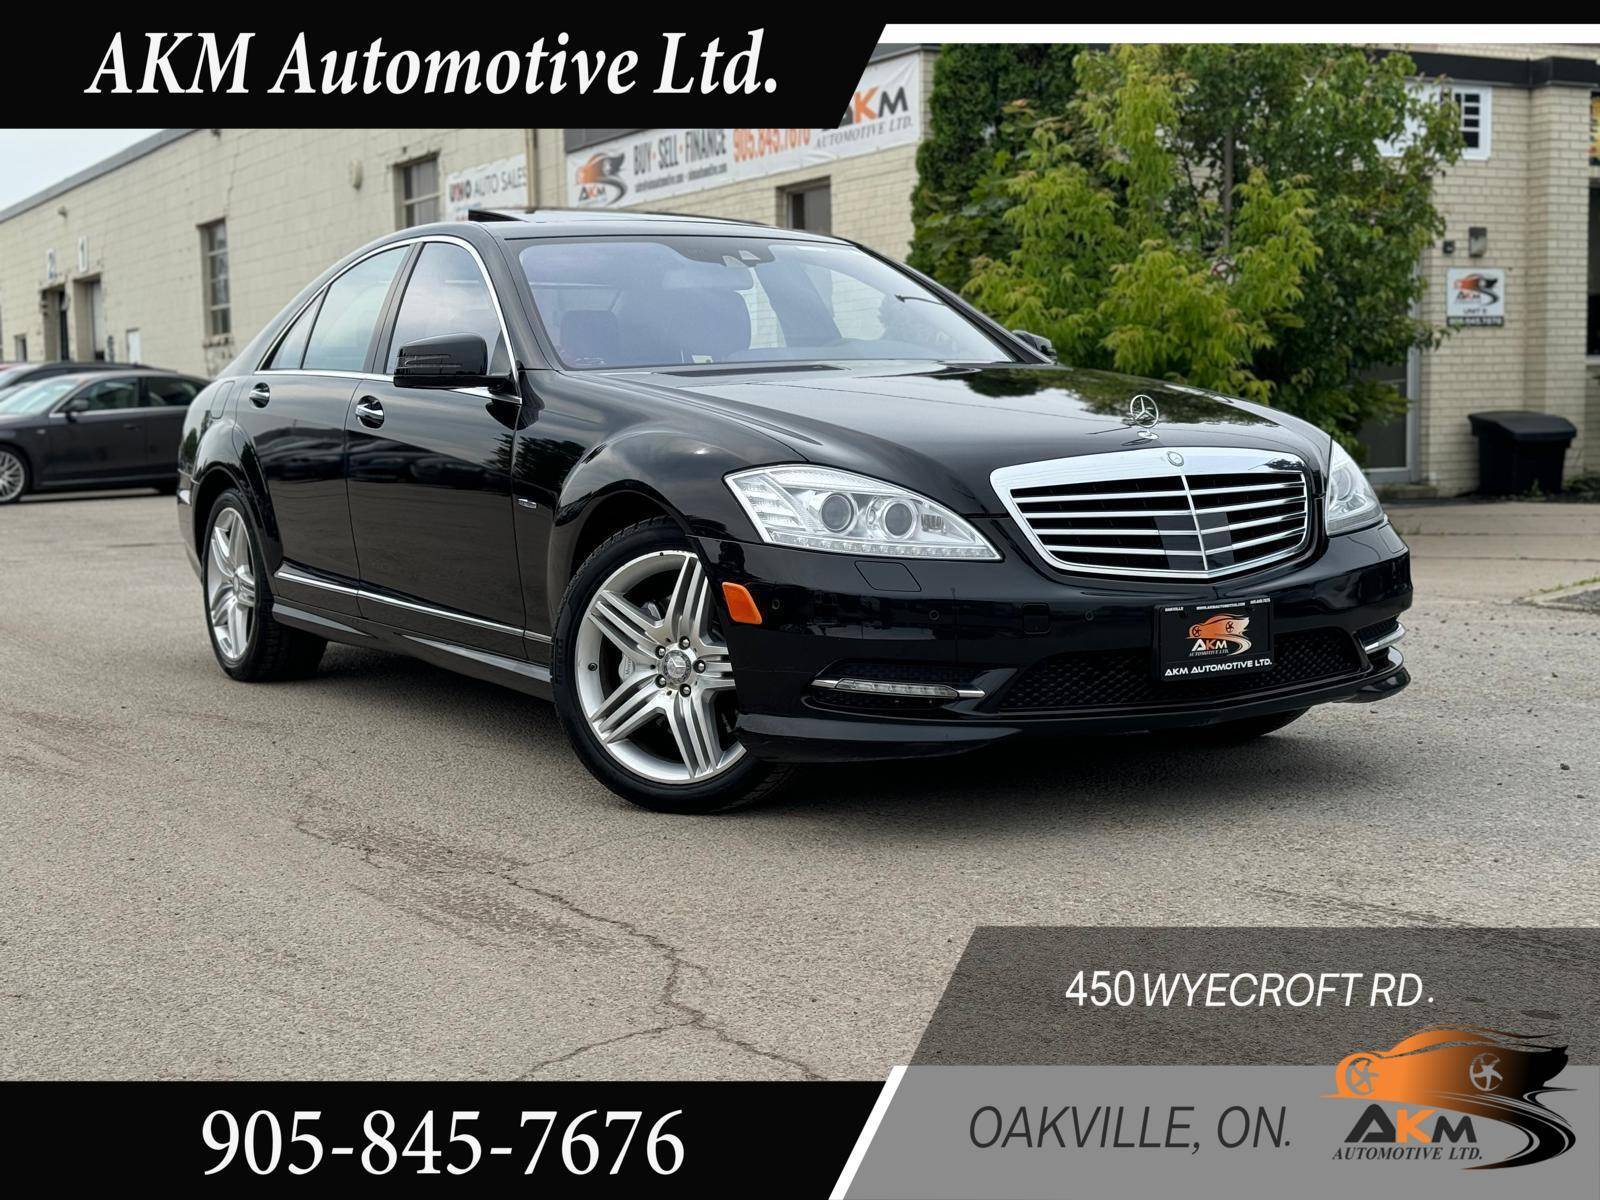 2012 Mercedes-Benz S-Class 4dr Sdn S550 4MATIC SWB, Certified